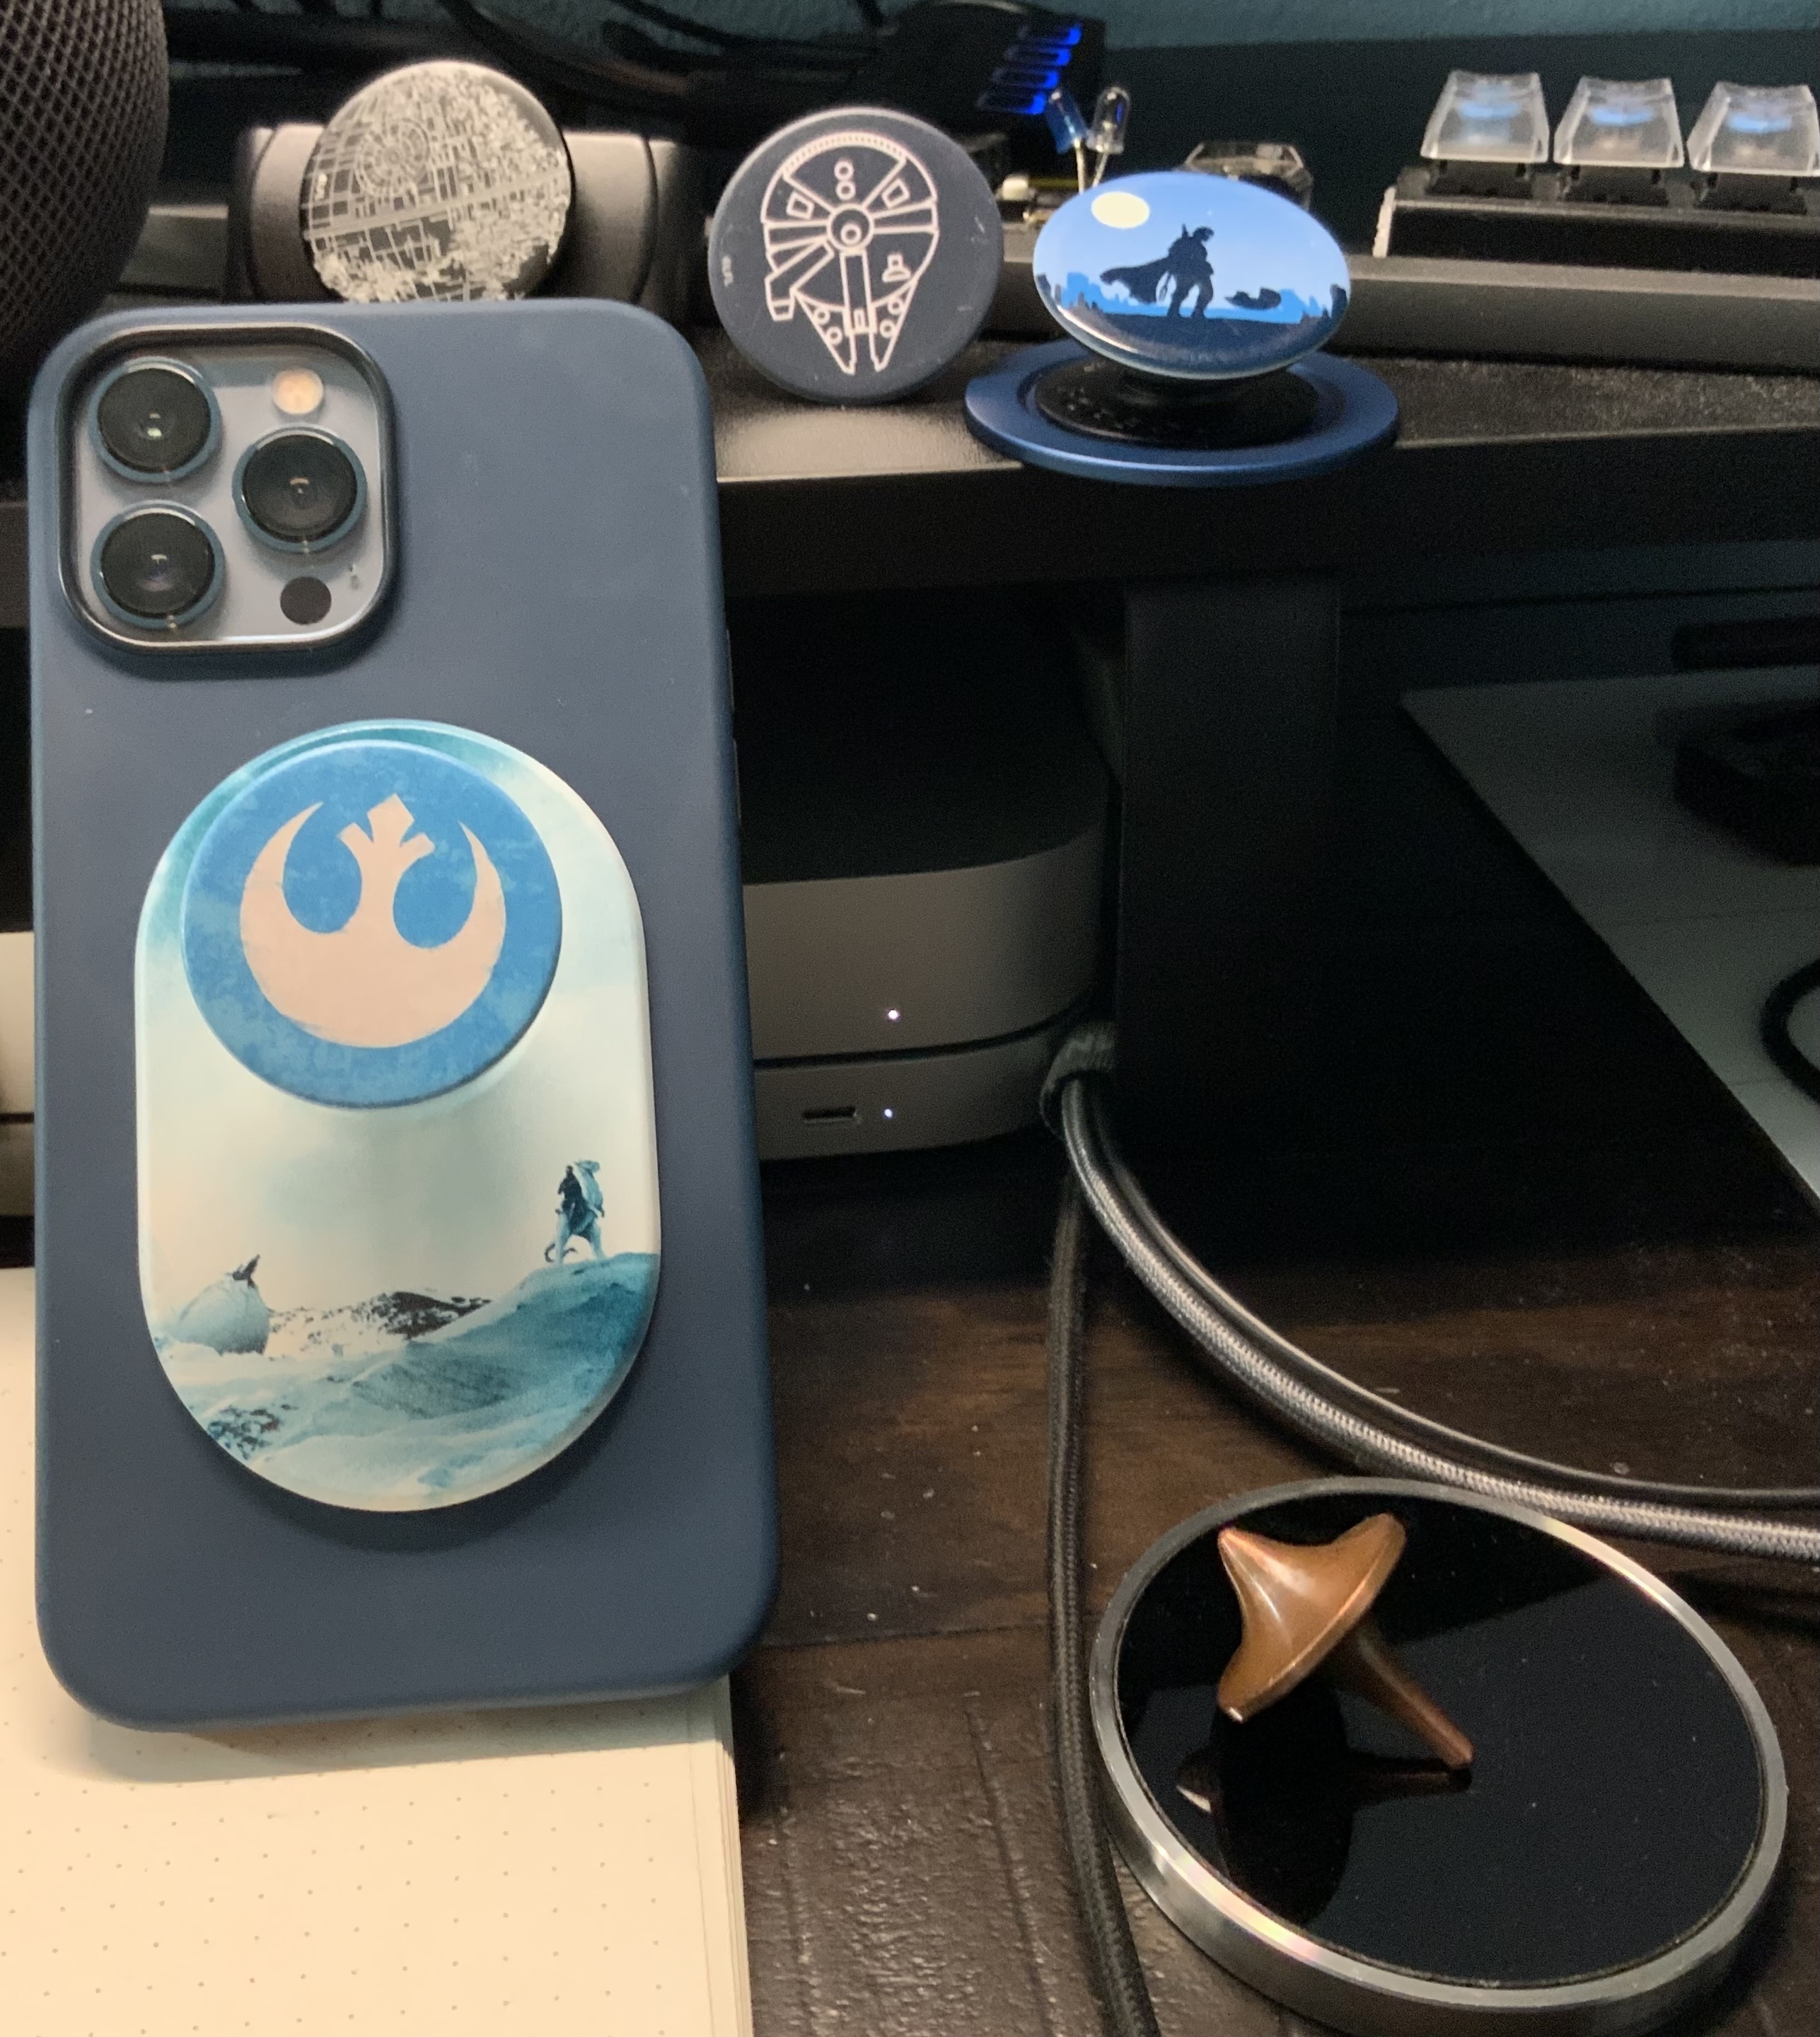 New iPhone 13 Pro Max Sierra Blue with Abyss Blue Silicone Case and a custom printed MagSafe PopSocket.